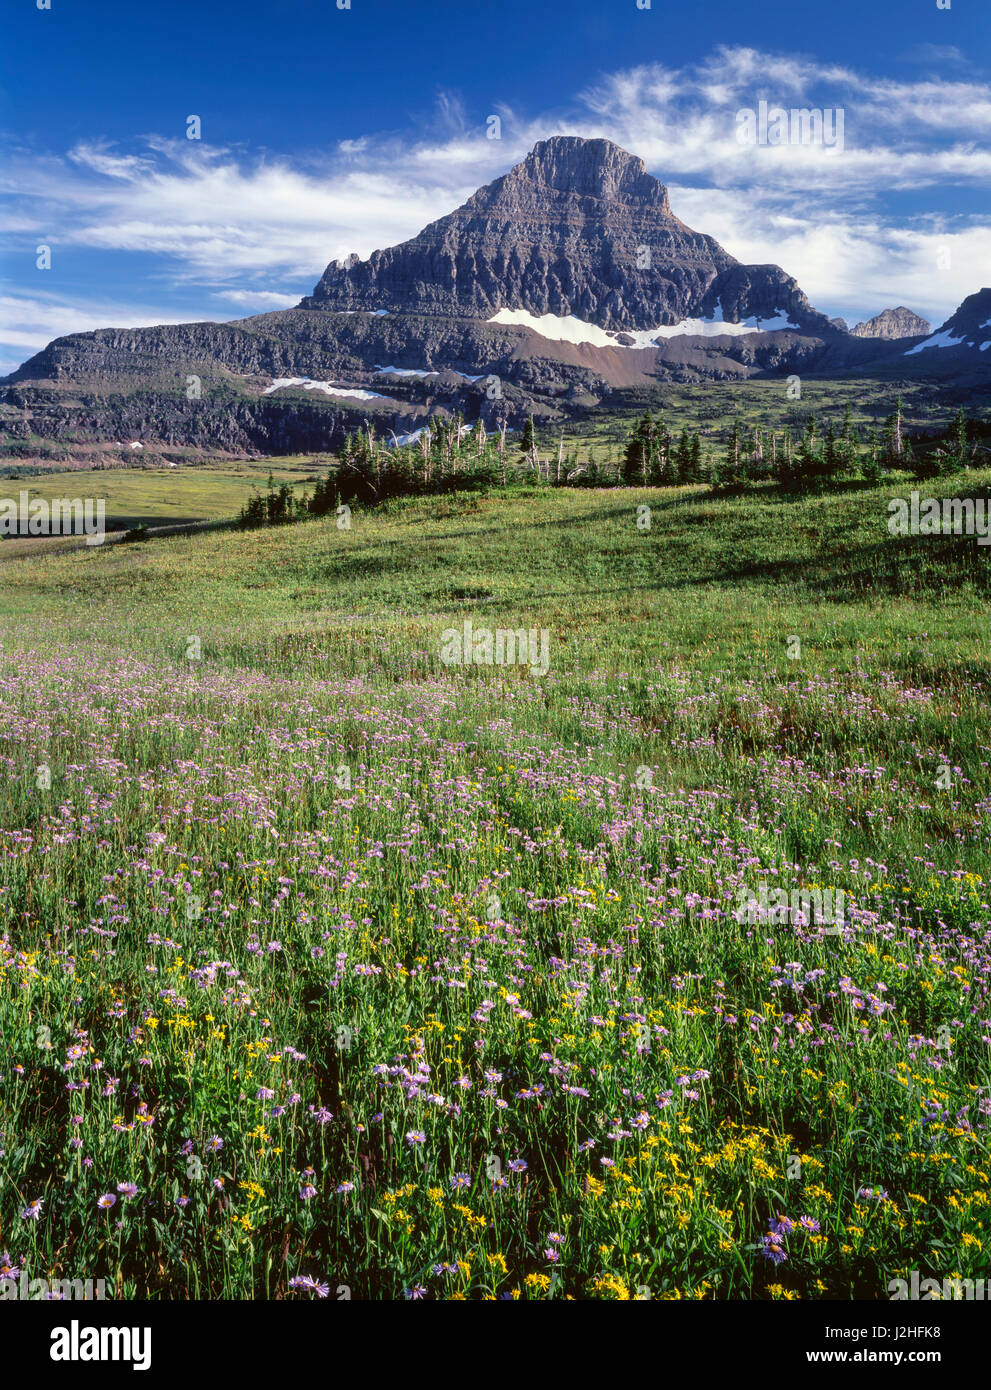 USA, Montana, Glacier National Park, Reynolds Mountain rises beyond wind-stunted conifers and meadow of showy fleabane and arnica near Logan Pass. (Large format sizes available) Stock Photo